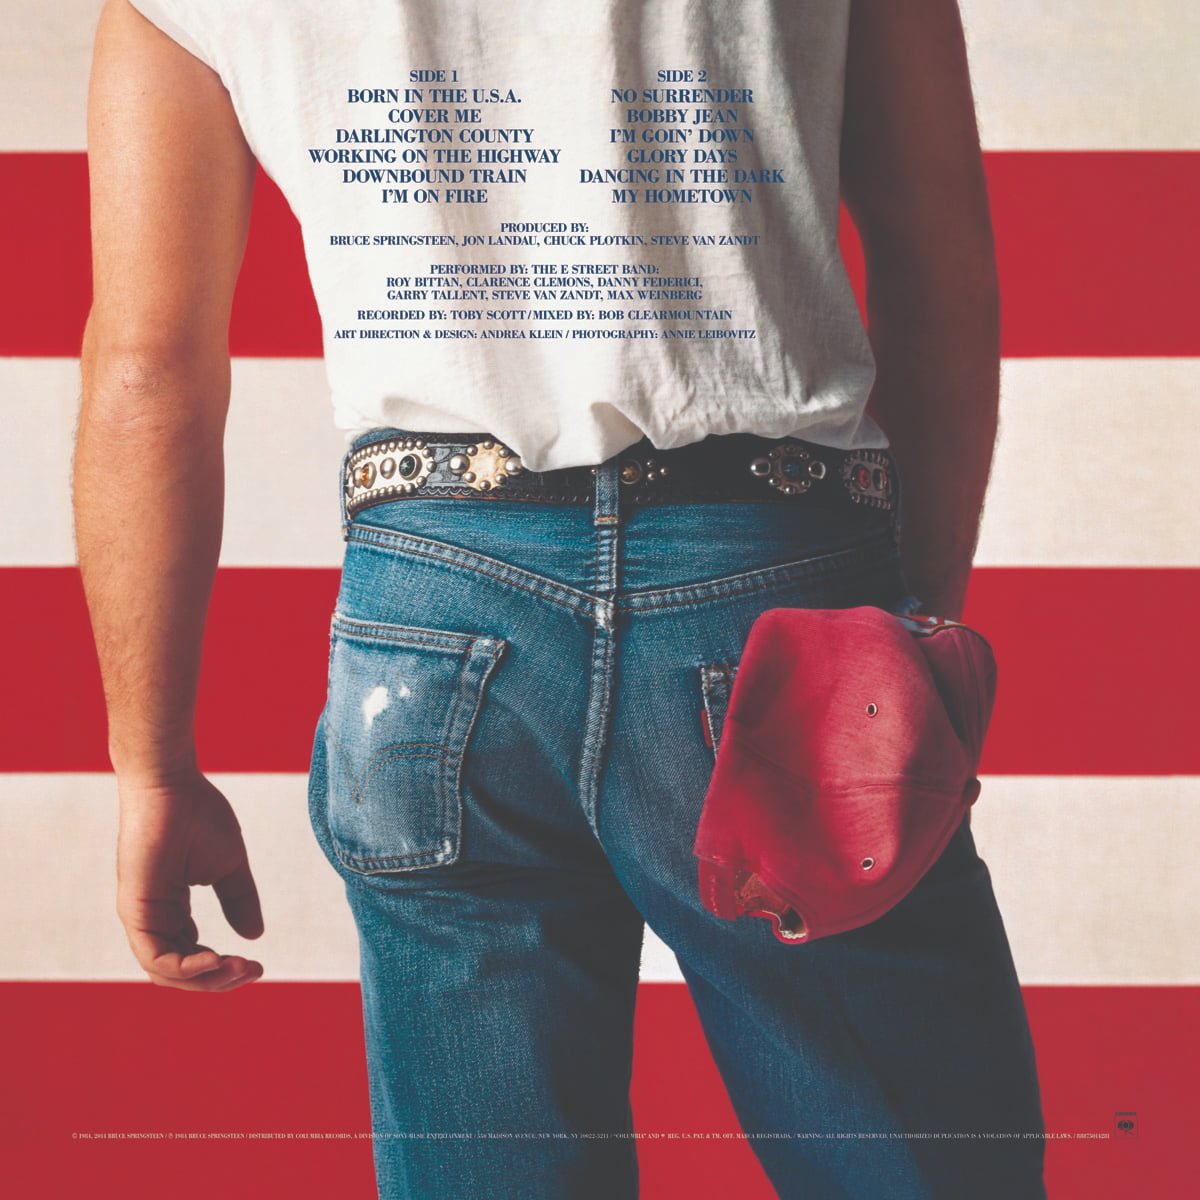 Bruce Springsteen Born in the U.S.A. back cover